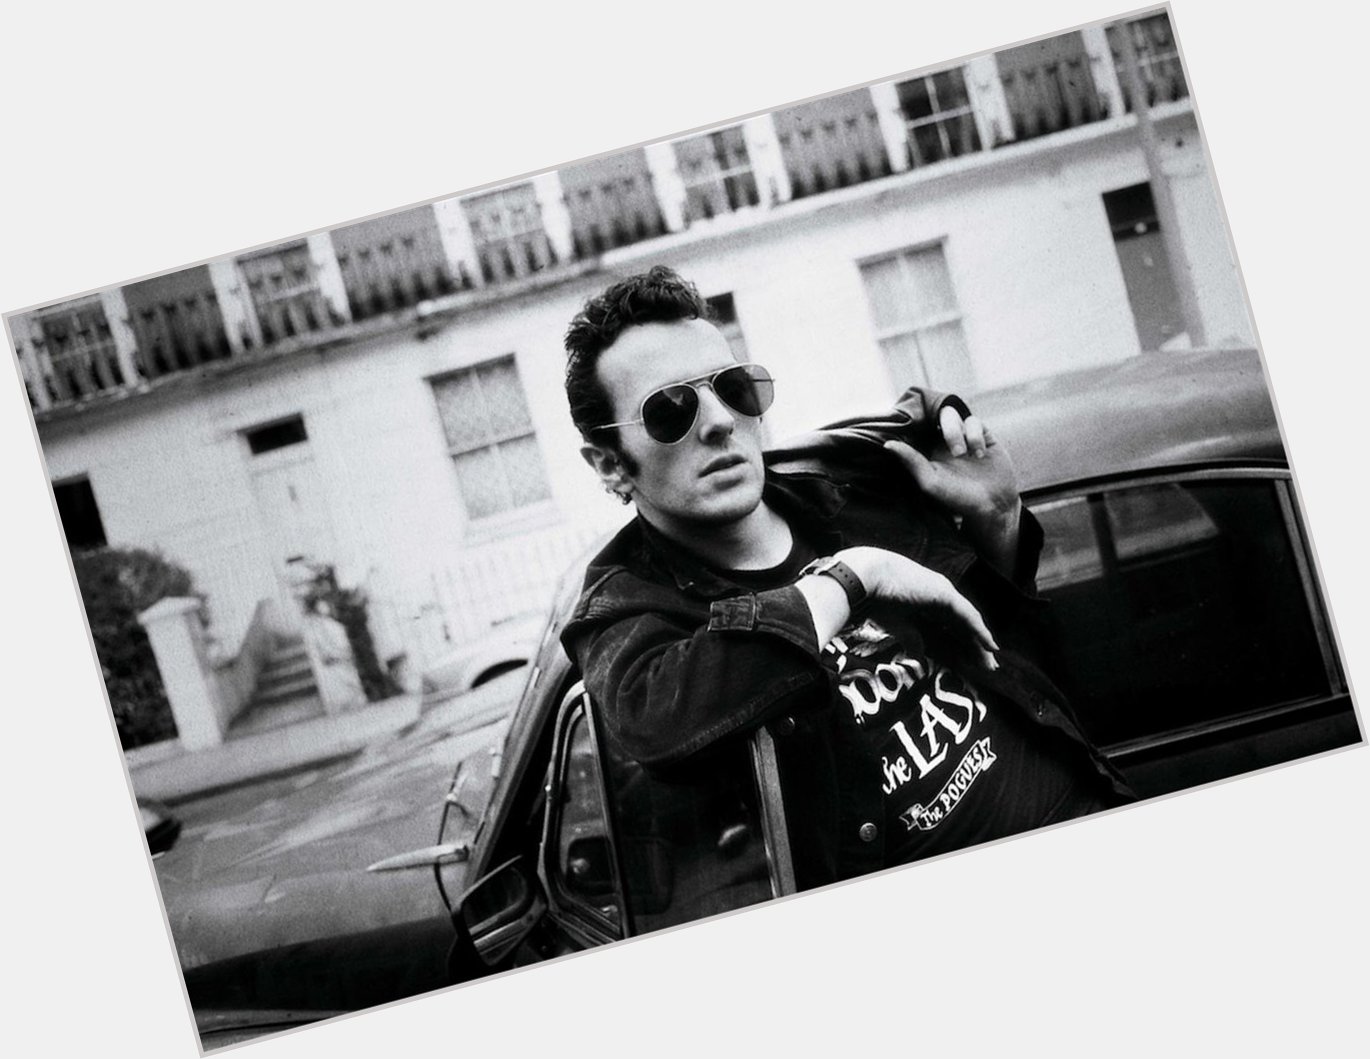 Happy birthday to my one and only true love, Joe Strummer. Died tragically young before he got to fuck me. 